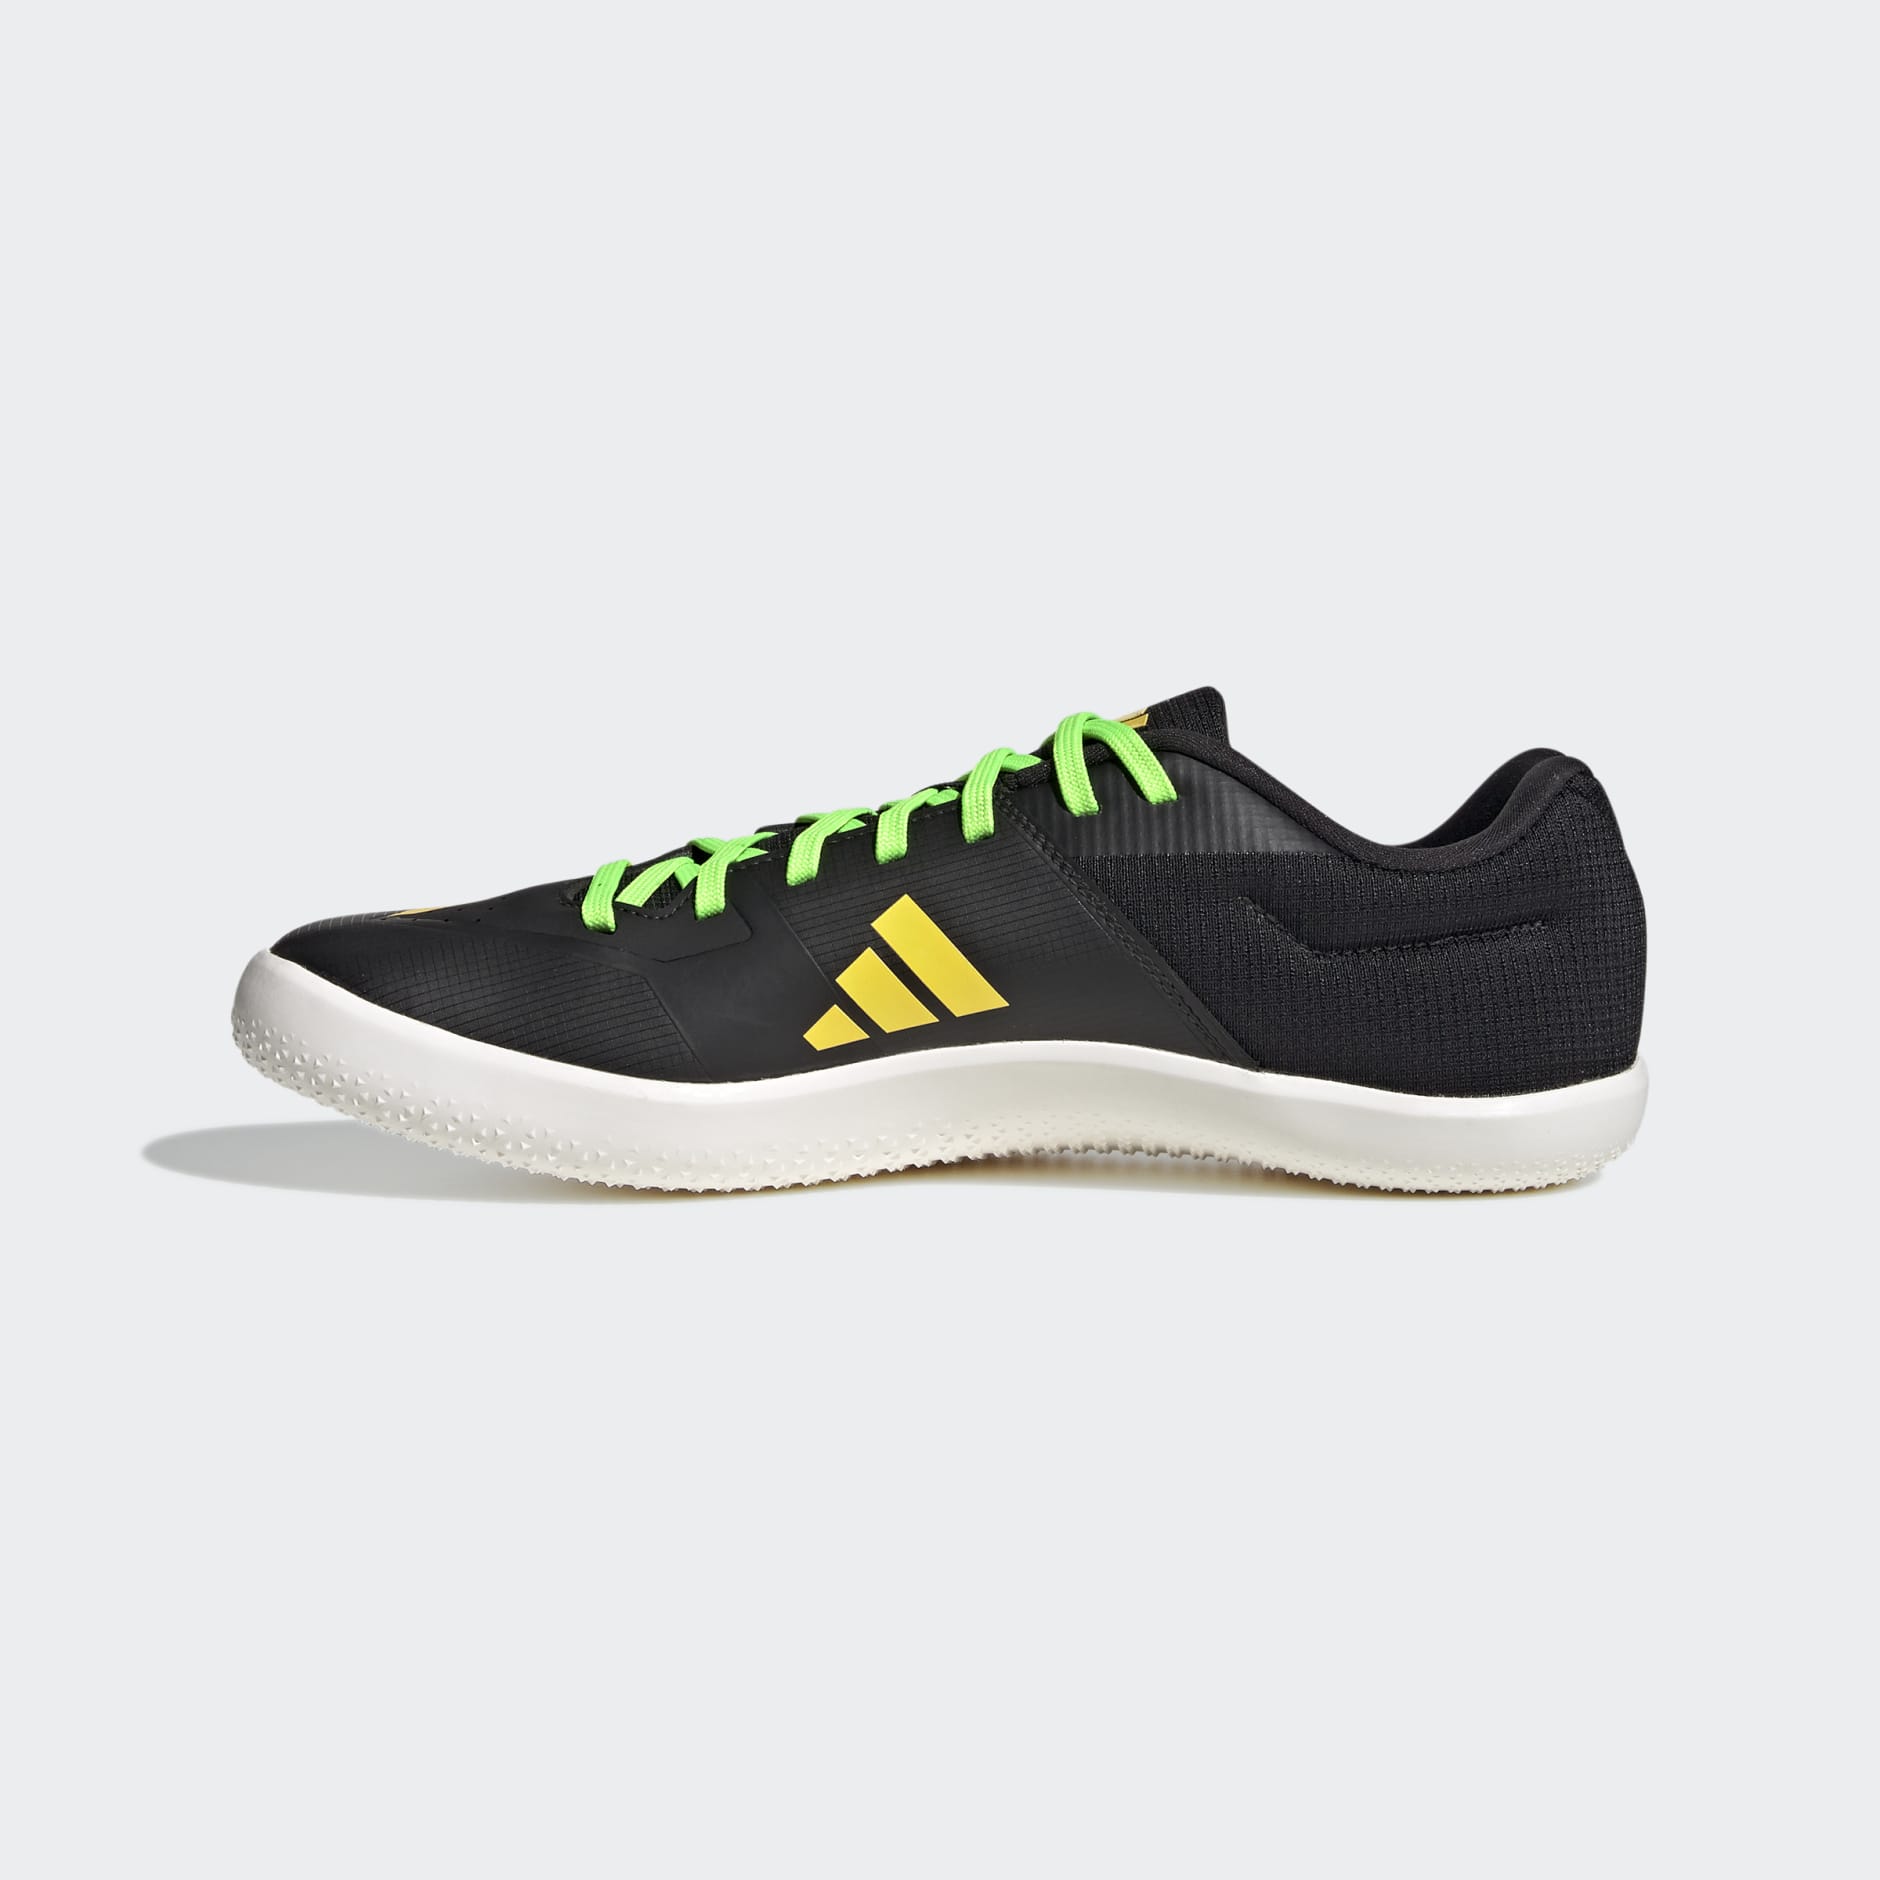 Shoes - Throwstar Shoes - Black | adidas South Africa